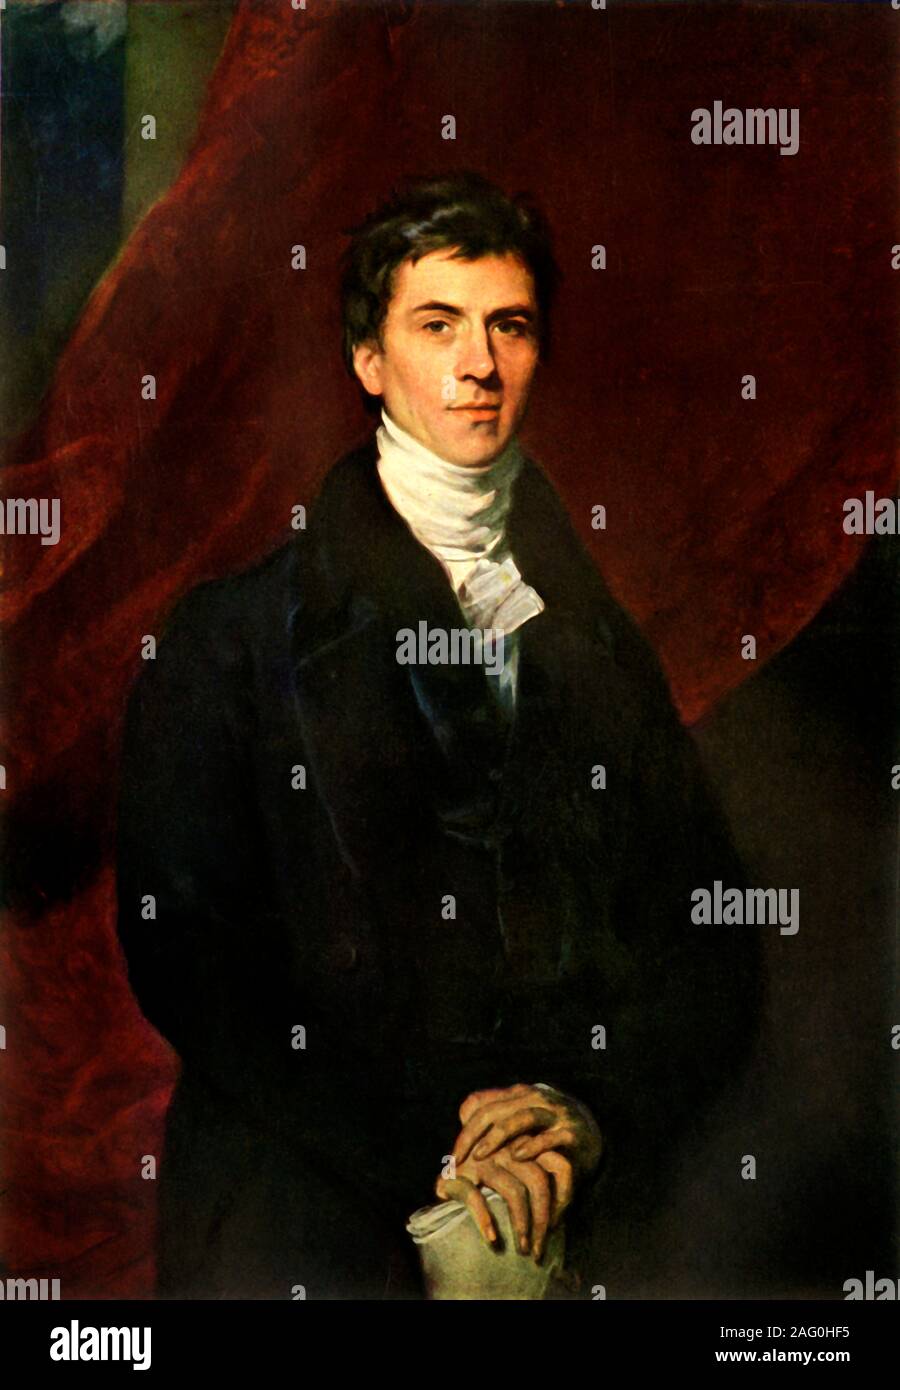 'Henry Brougham, 1st Baron Brougham and Vaux', 1825, (1944). Portrait of Scottish lawyer and politician Henry Brougham (1778-1868) who defended Queen Caroline at her trial in 1820. He worked for the establishment of London University and the first Mechanic's Institute, and the Society for the Diffusion of Useful Knowledge which published The Penny Magazine. In 1857 he founded the Social Science Association. Painting in the National Portrait Gallery, London. From &quot;British Portrait Painters&quot;, by John Russell. [Collins, London, 1944] Stock Photo